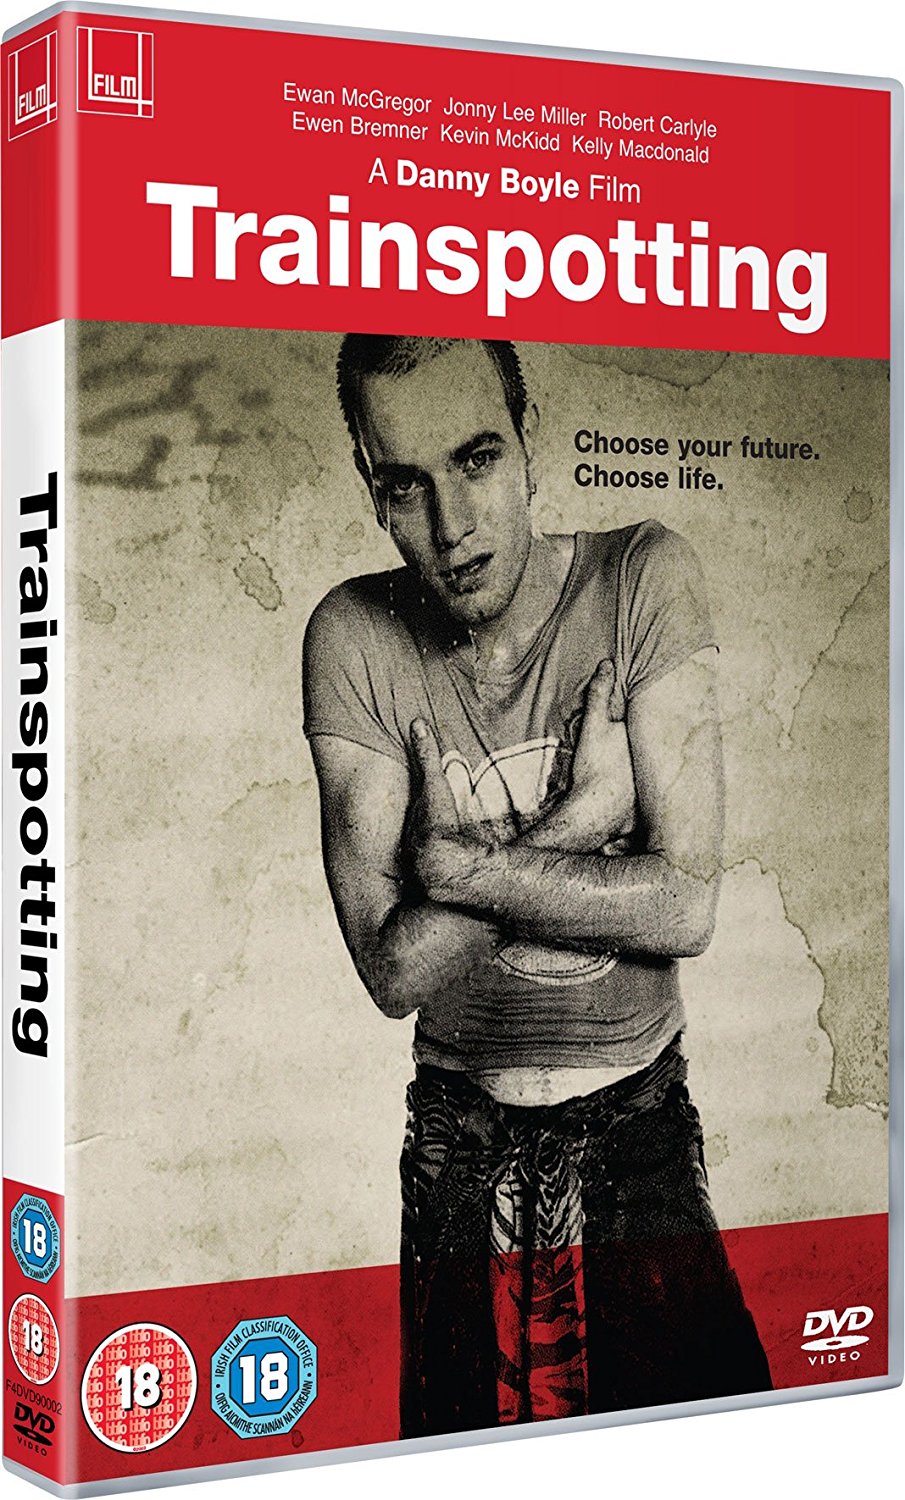 Trainspotting Special Edition | Danny Boyle